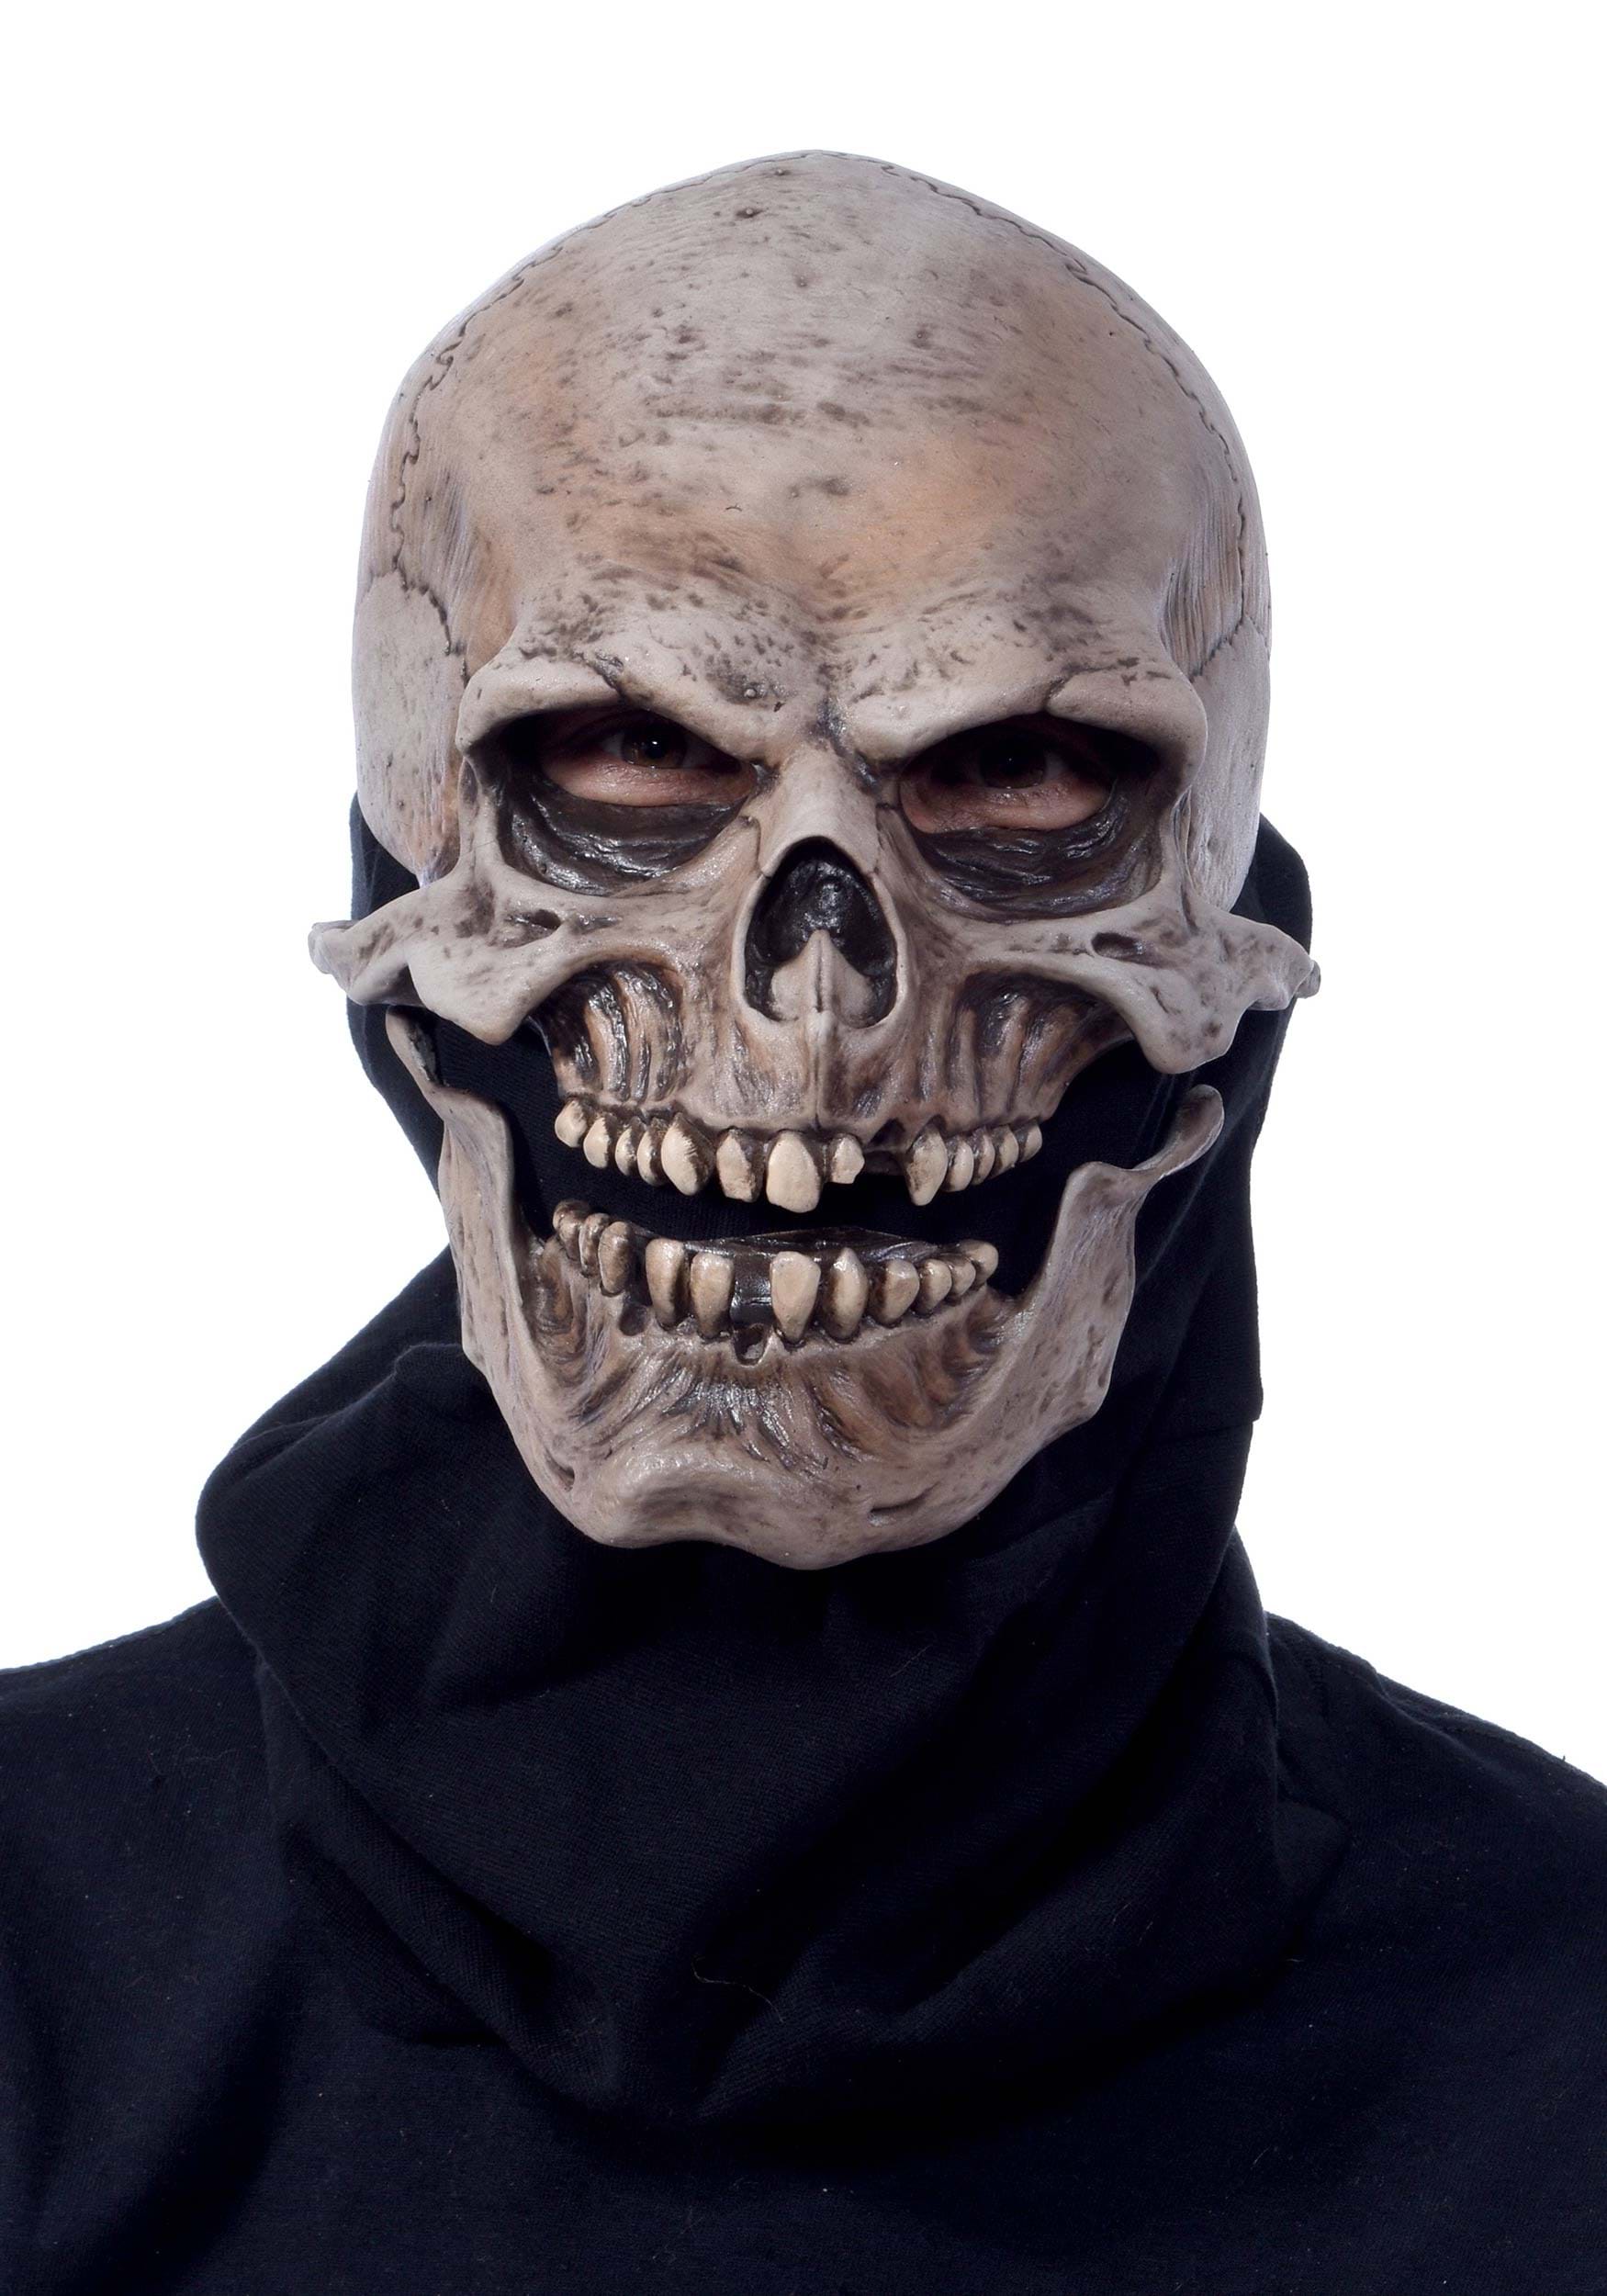 Moving Mouth Skull Adult Mask